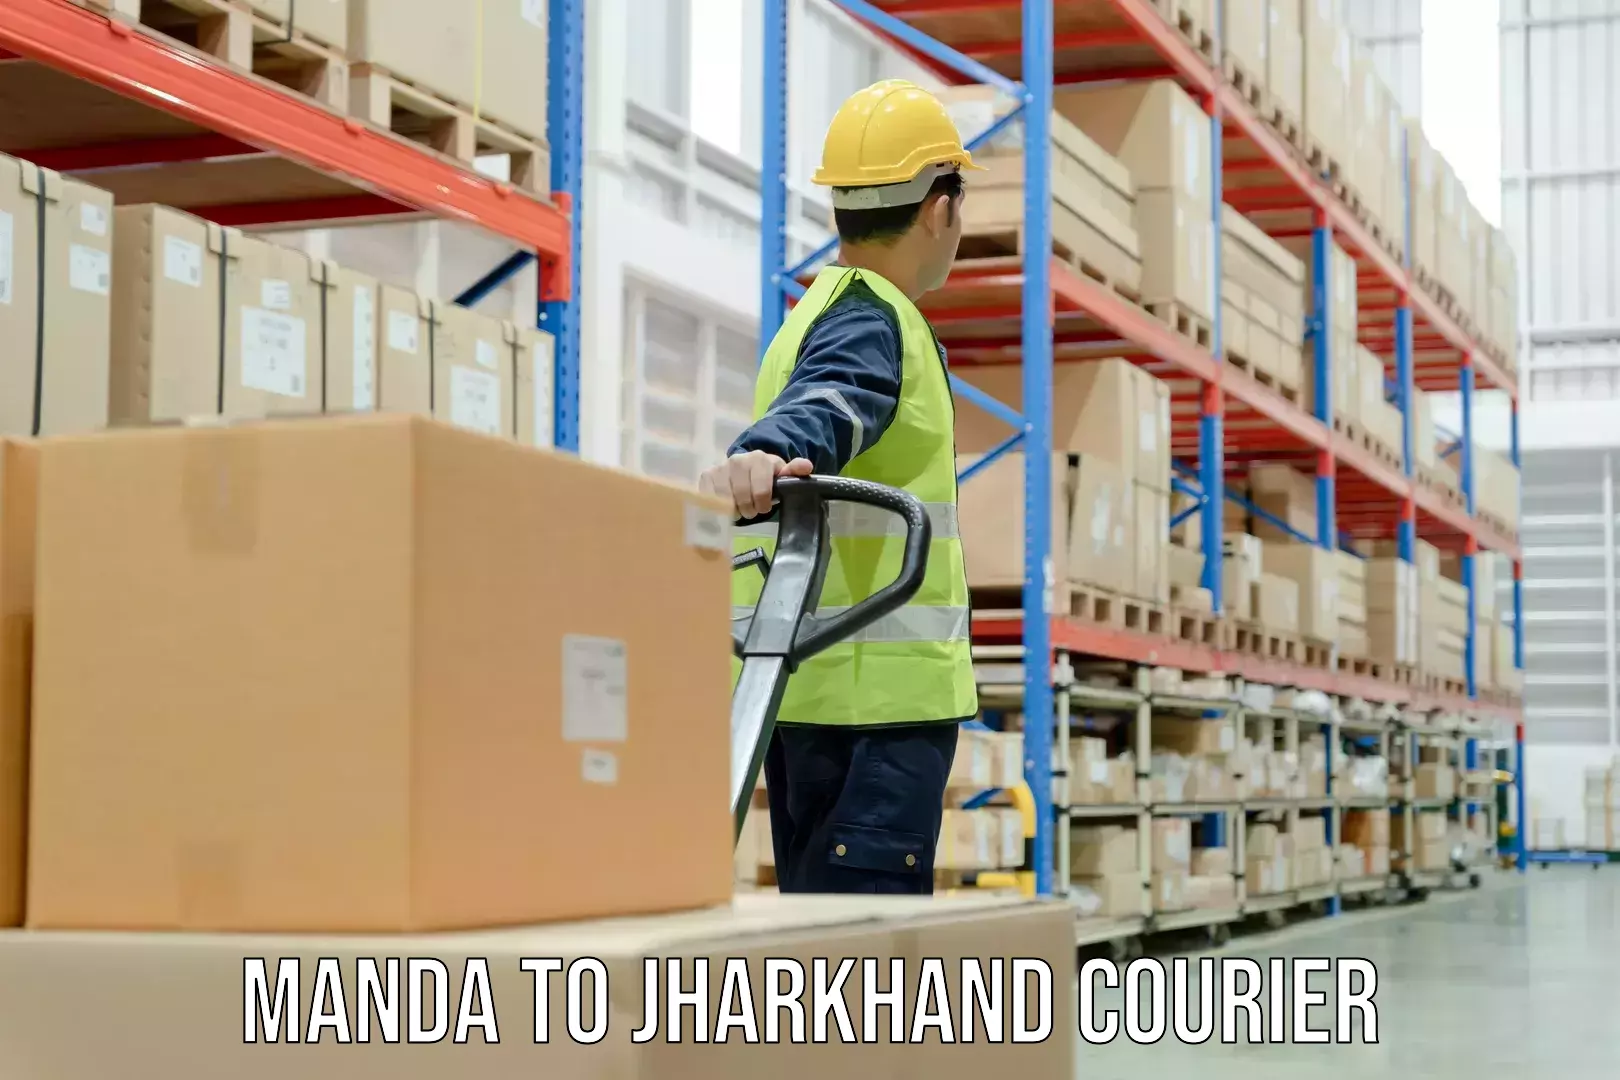 Reliable courier service Manda to Isri